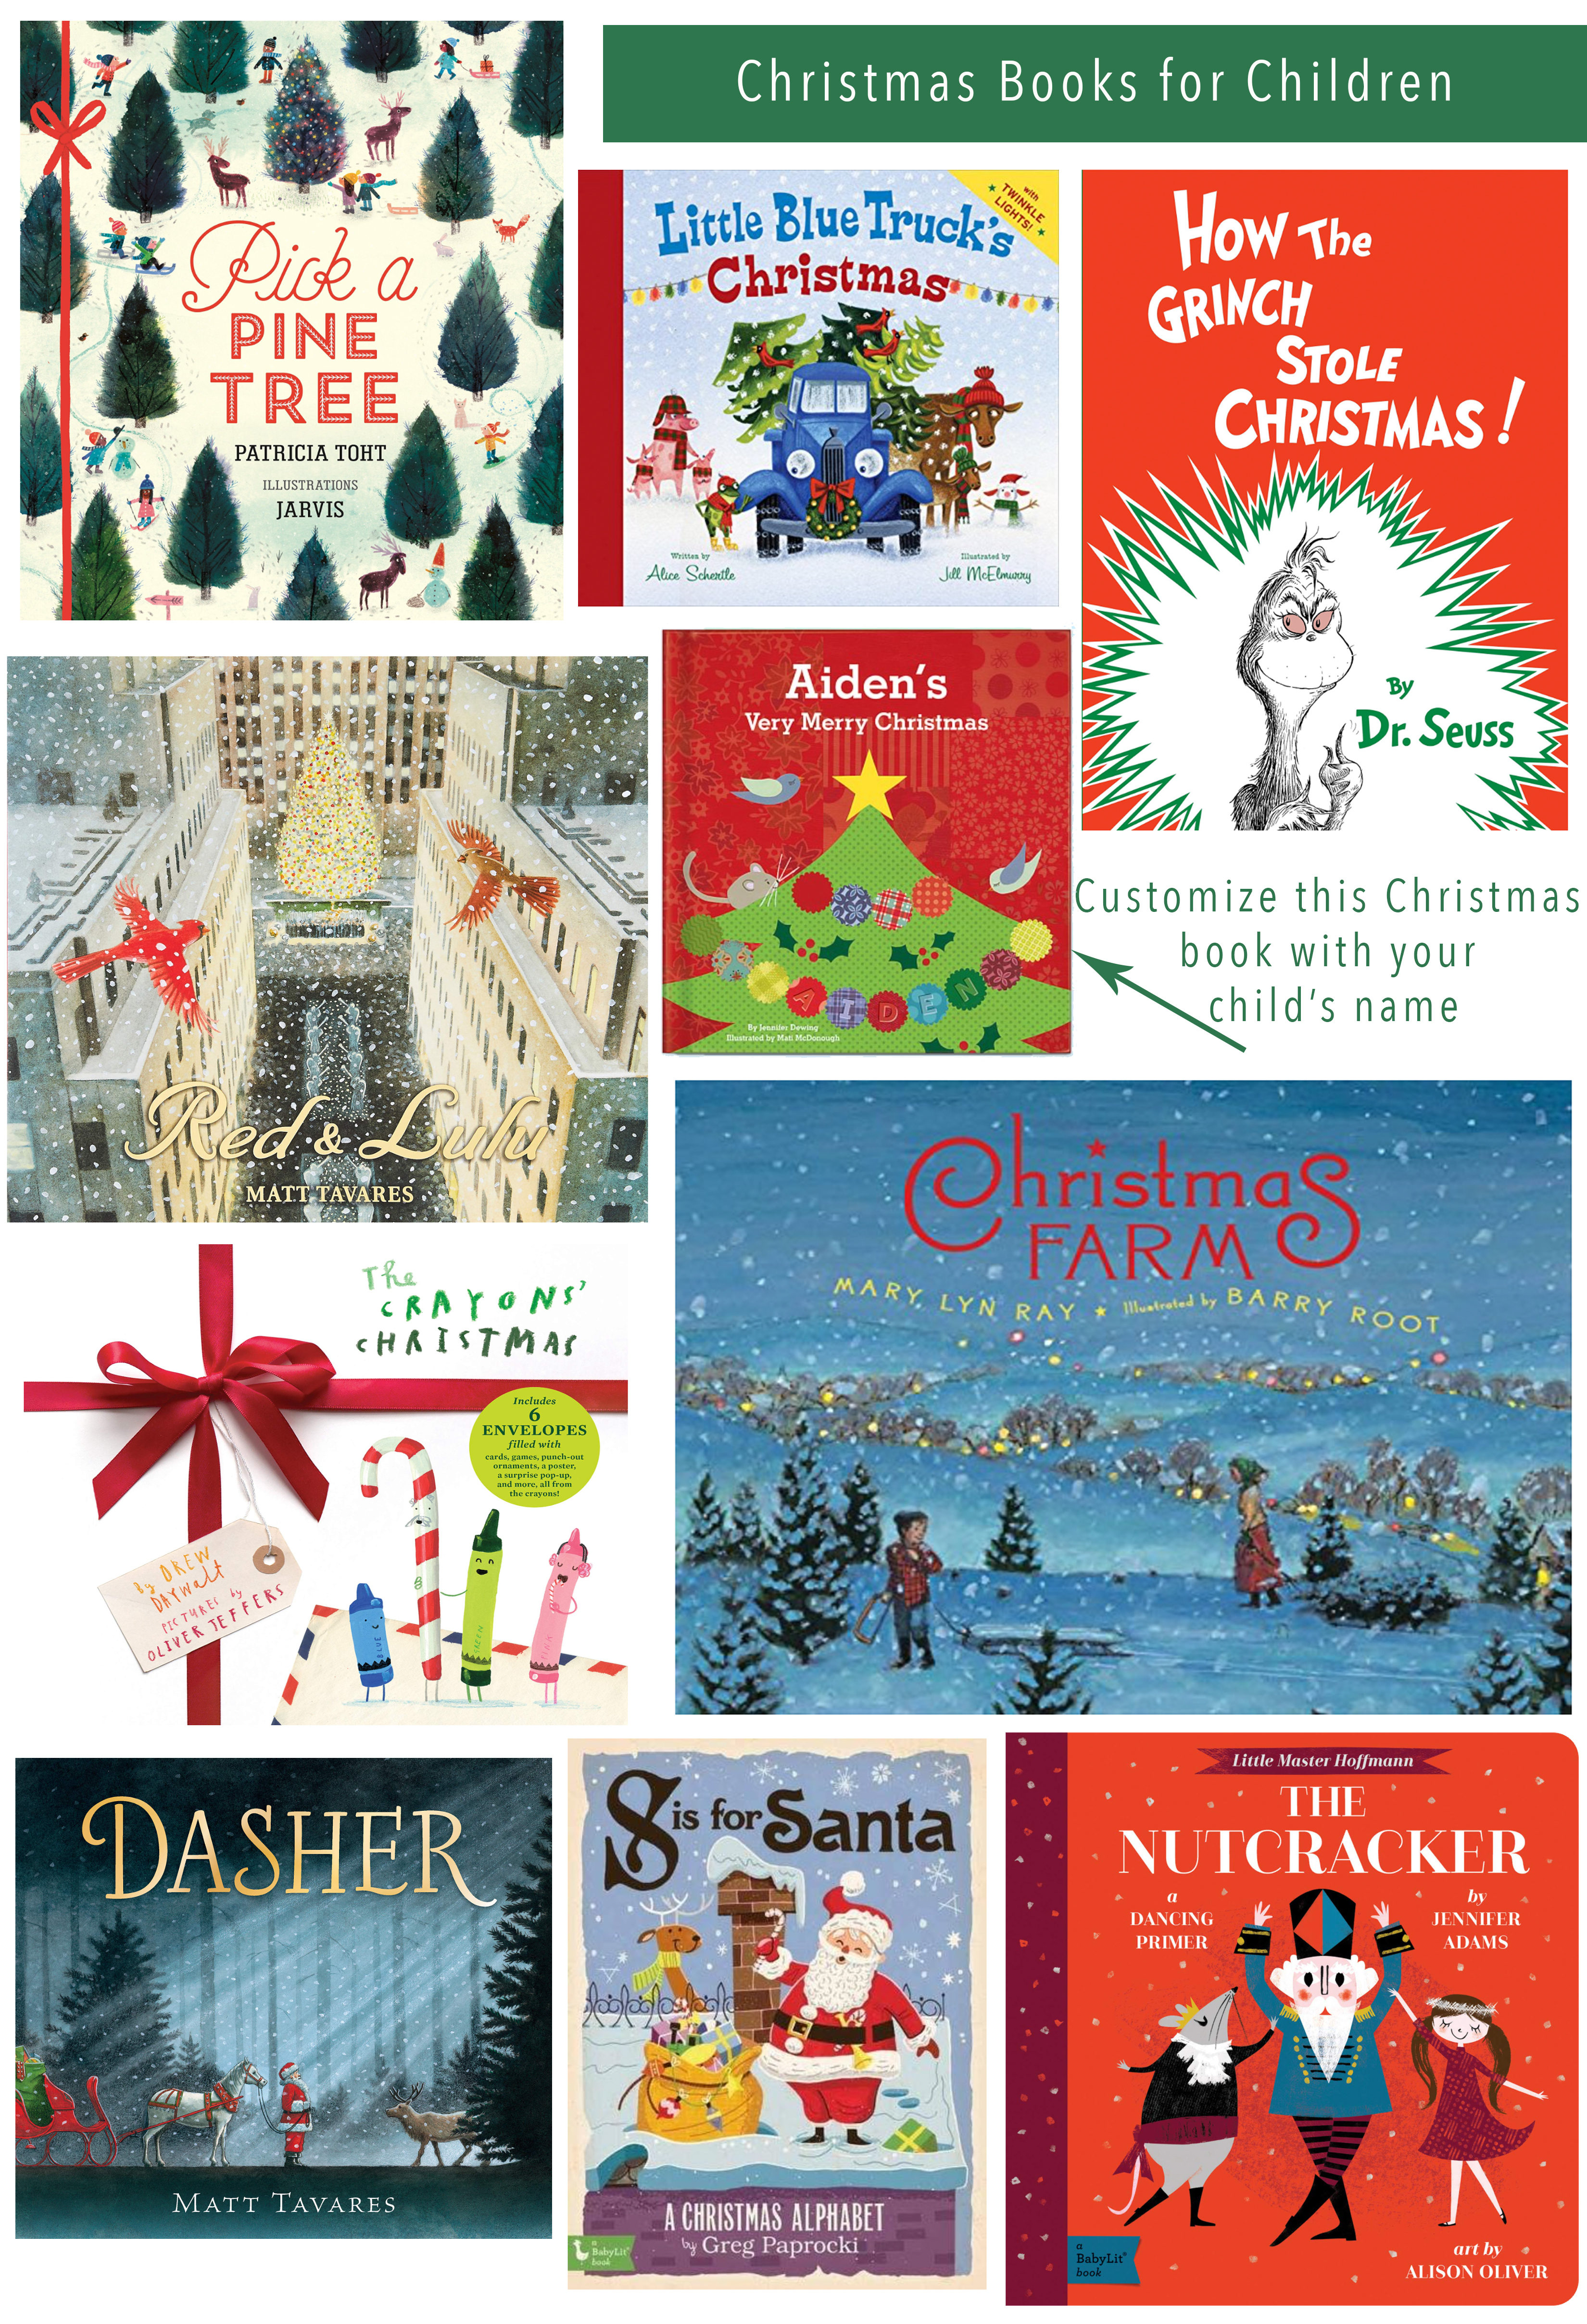 christmas-books-for-children-holiday-books-lo-murphy